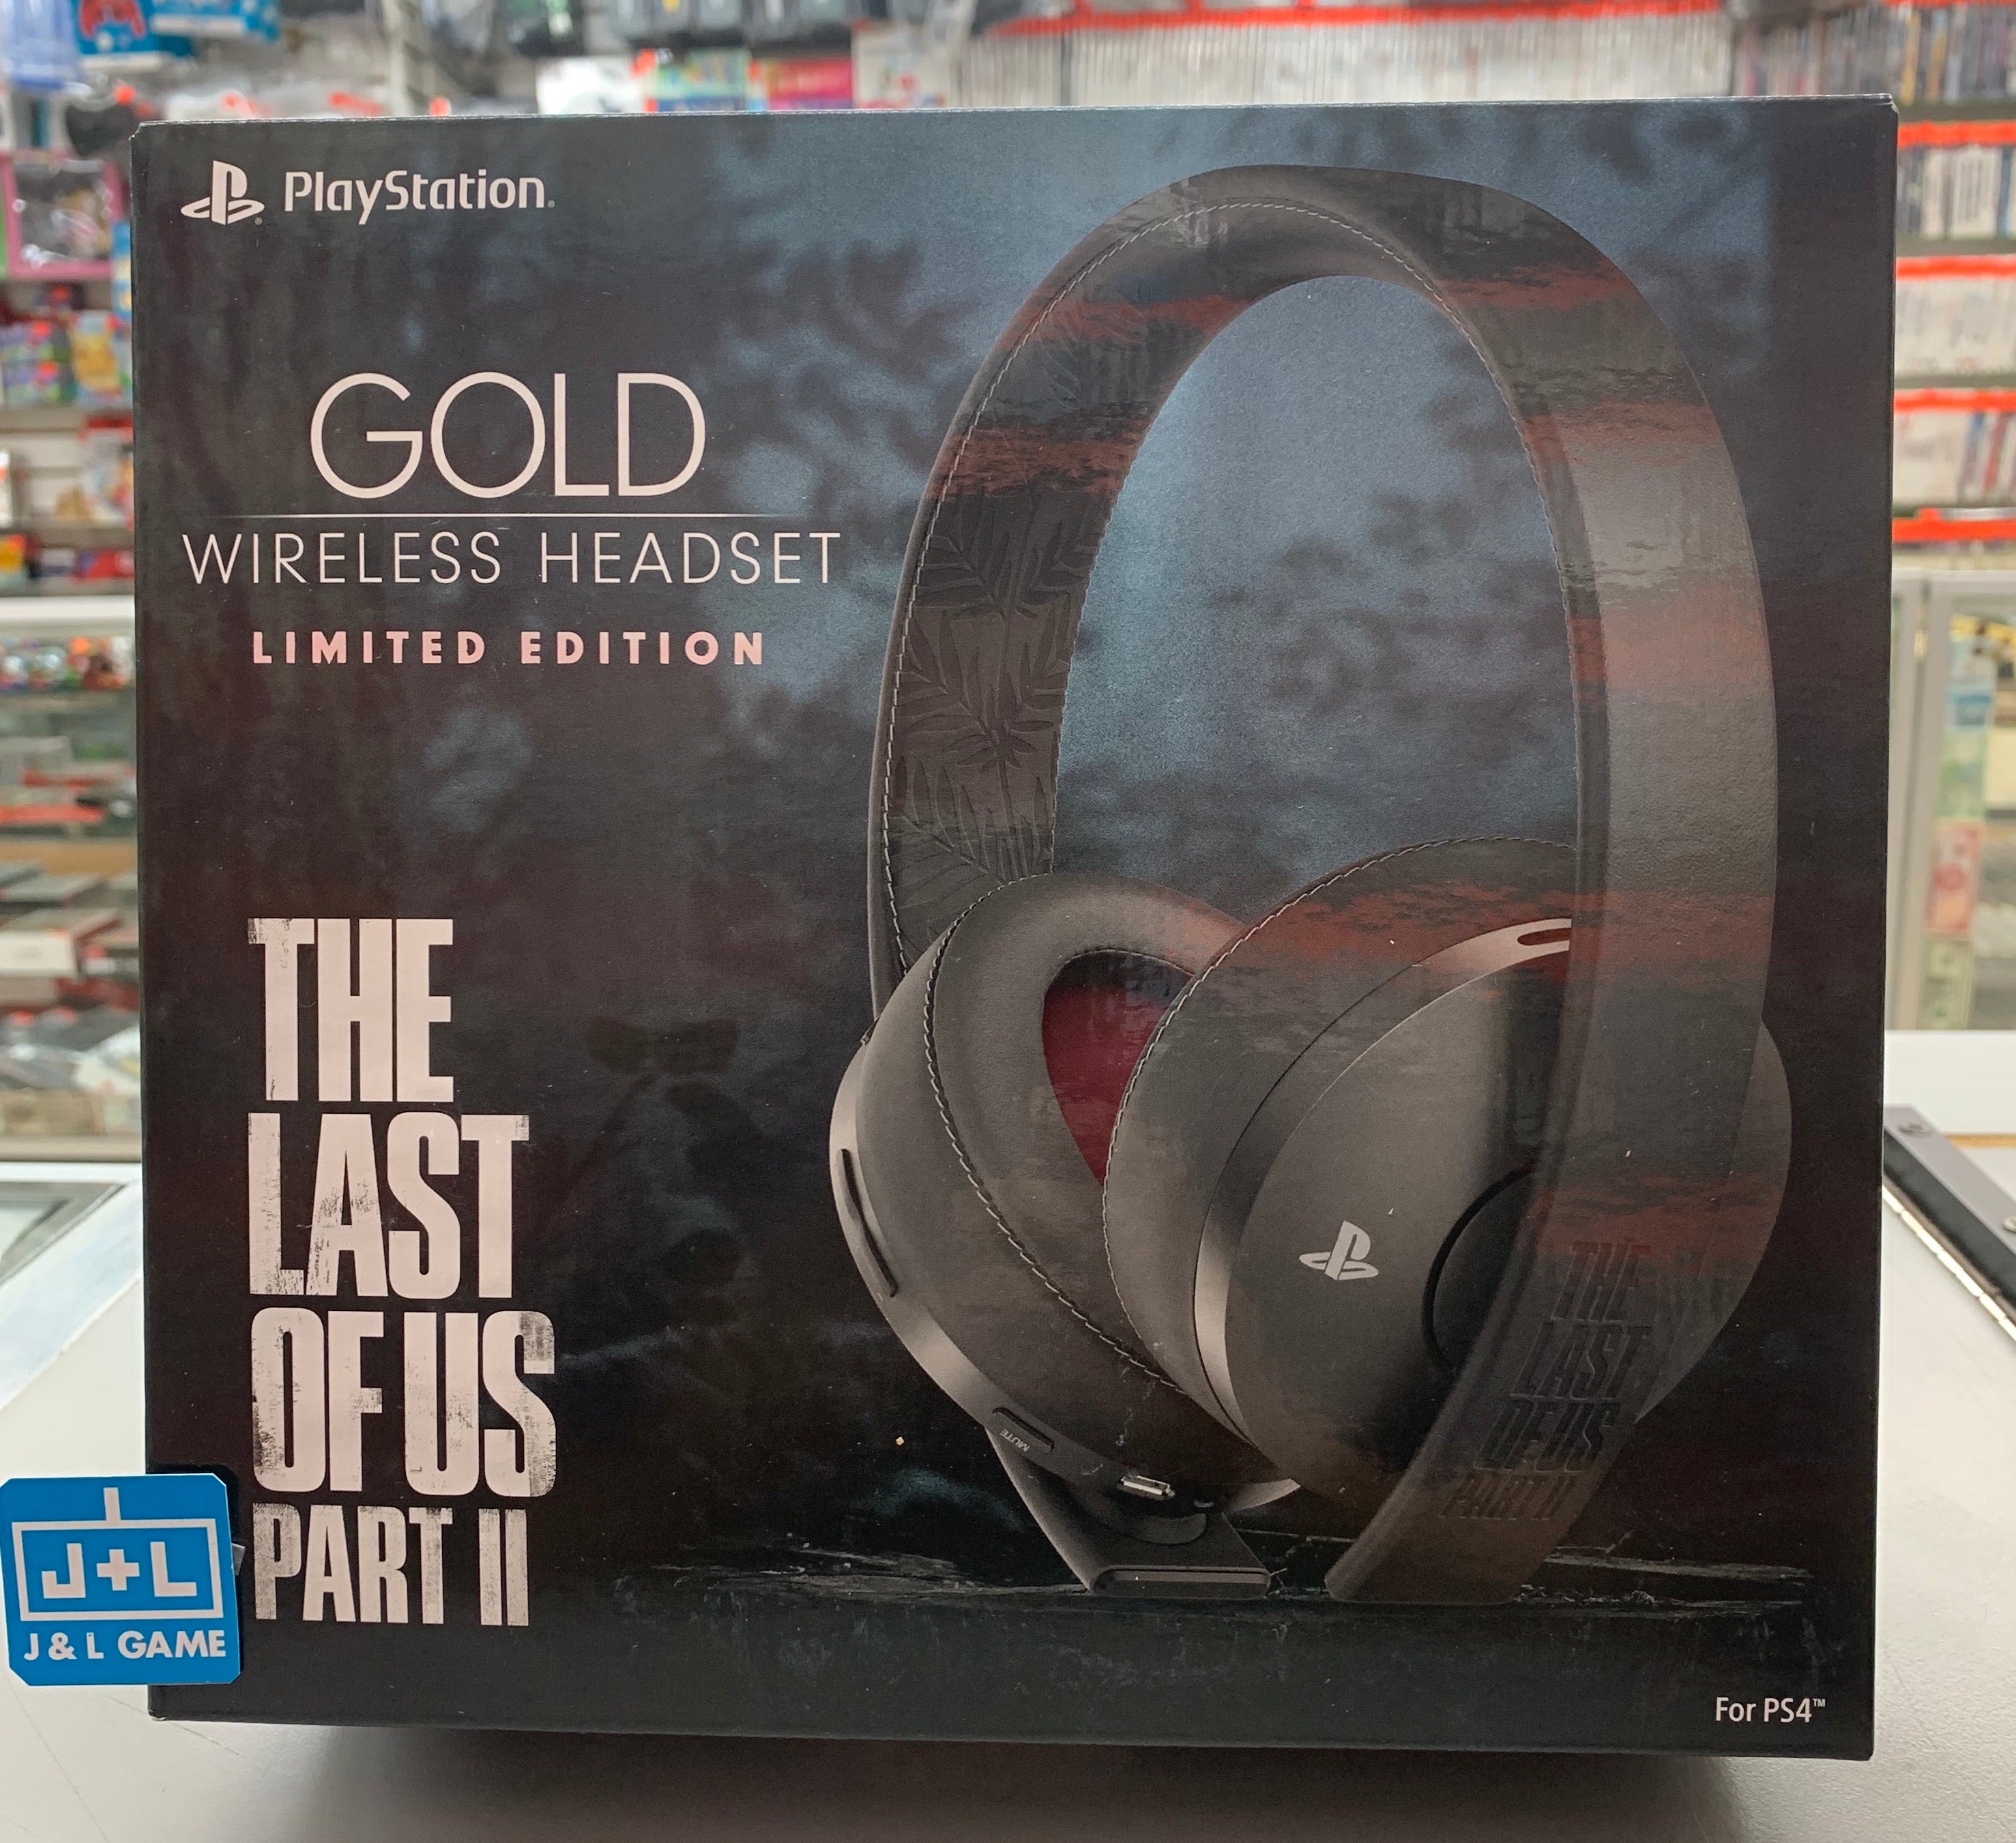 Sony PS4 Virtual Surround Wireless Gaming Headset - The Last of Us Part 2 Accessories Sony   